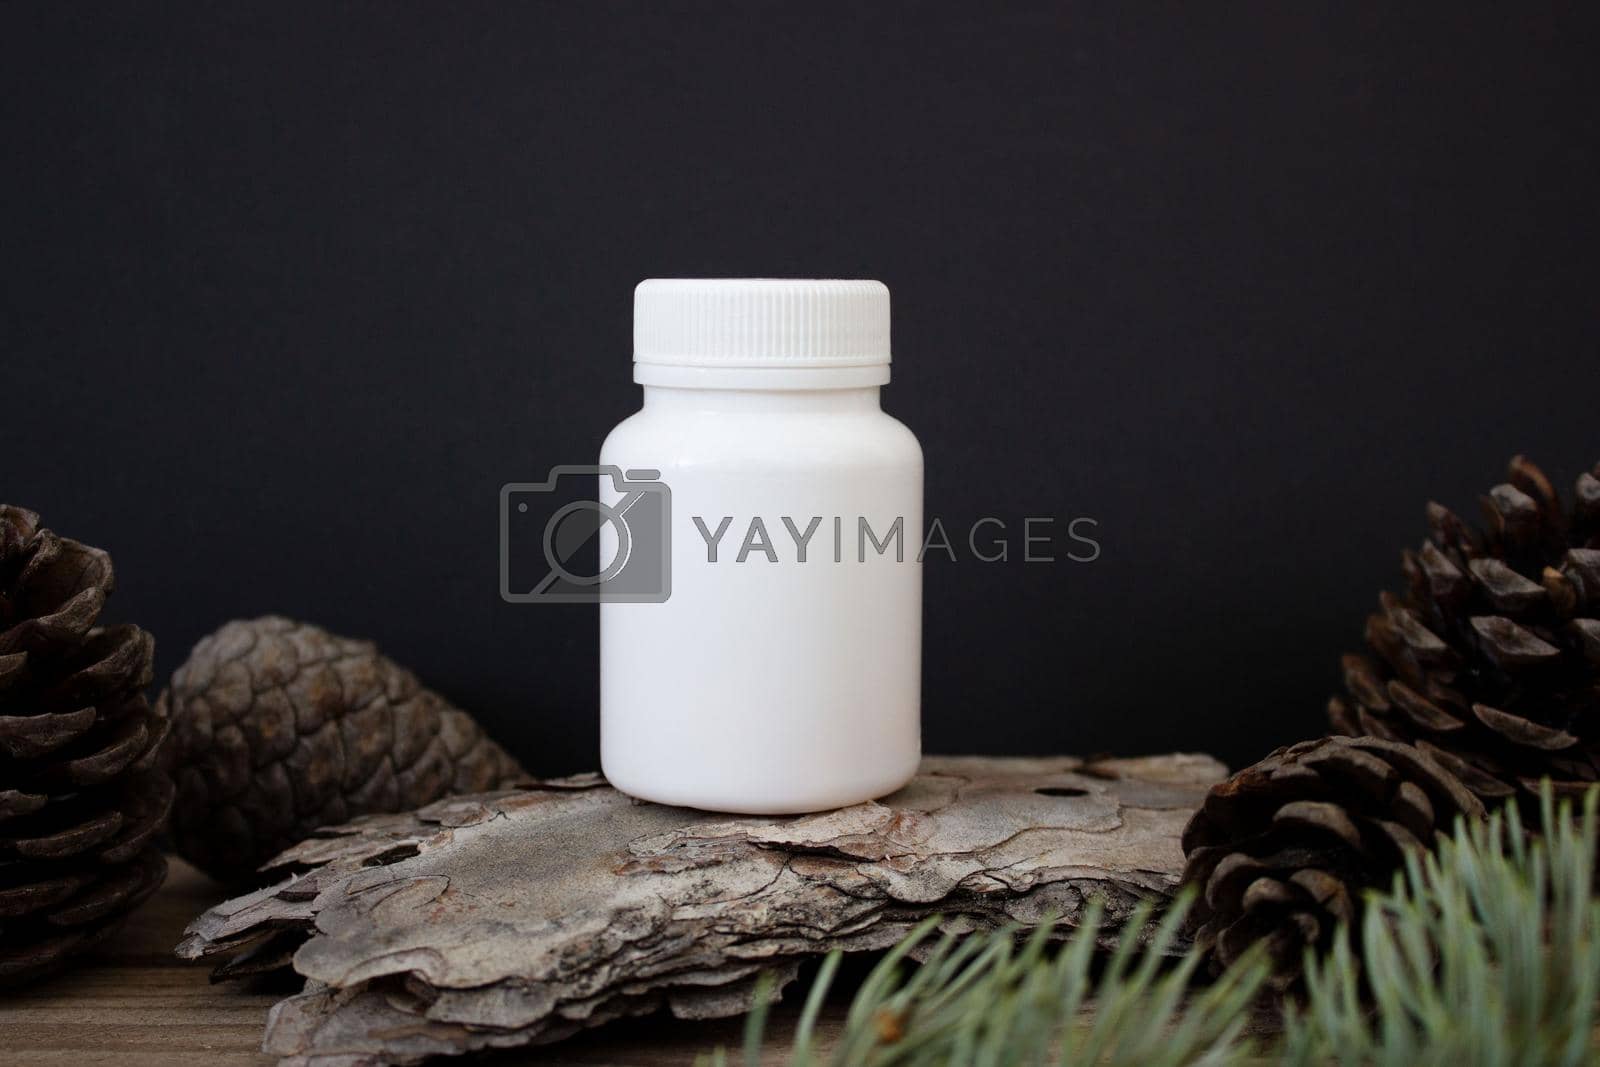 Mockup of a white plastic jar on a black background with tree bark and spruce branches, beauty product packaging. Promotion, sale, presentation of cosmetic products.